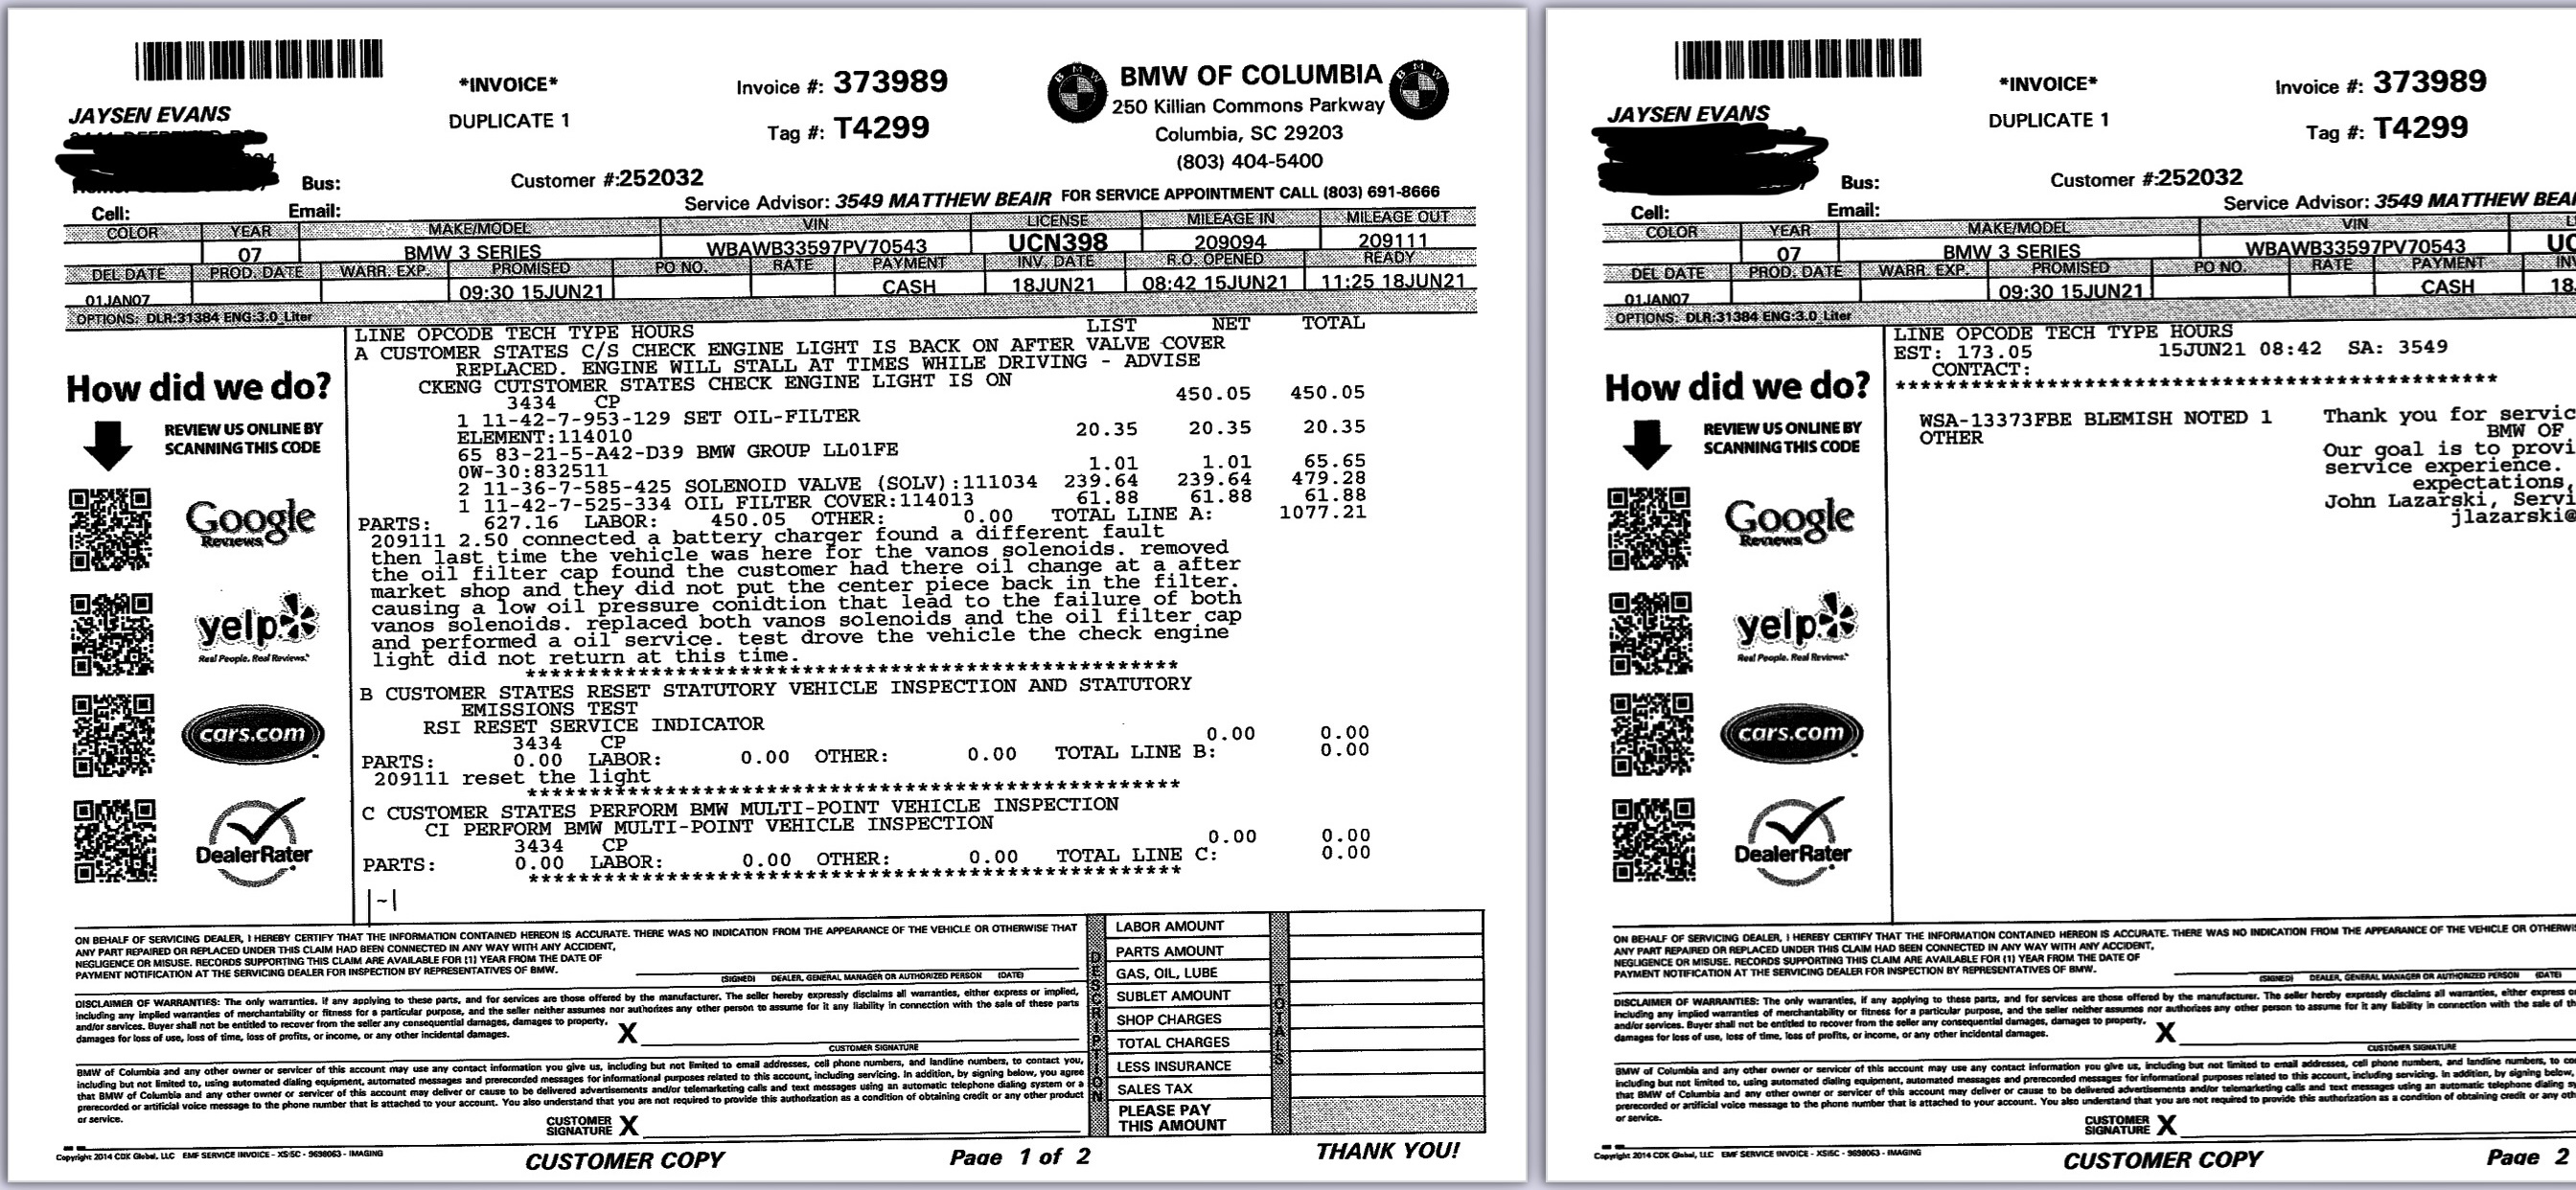 Invoice for cost of repair